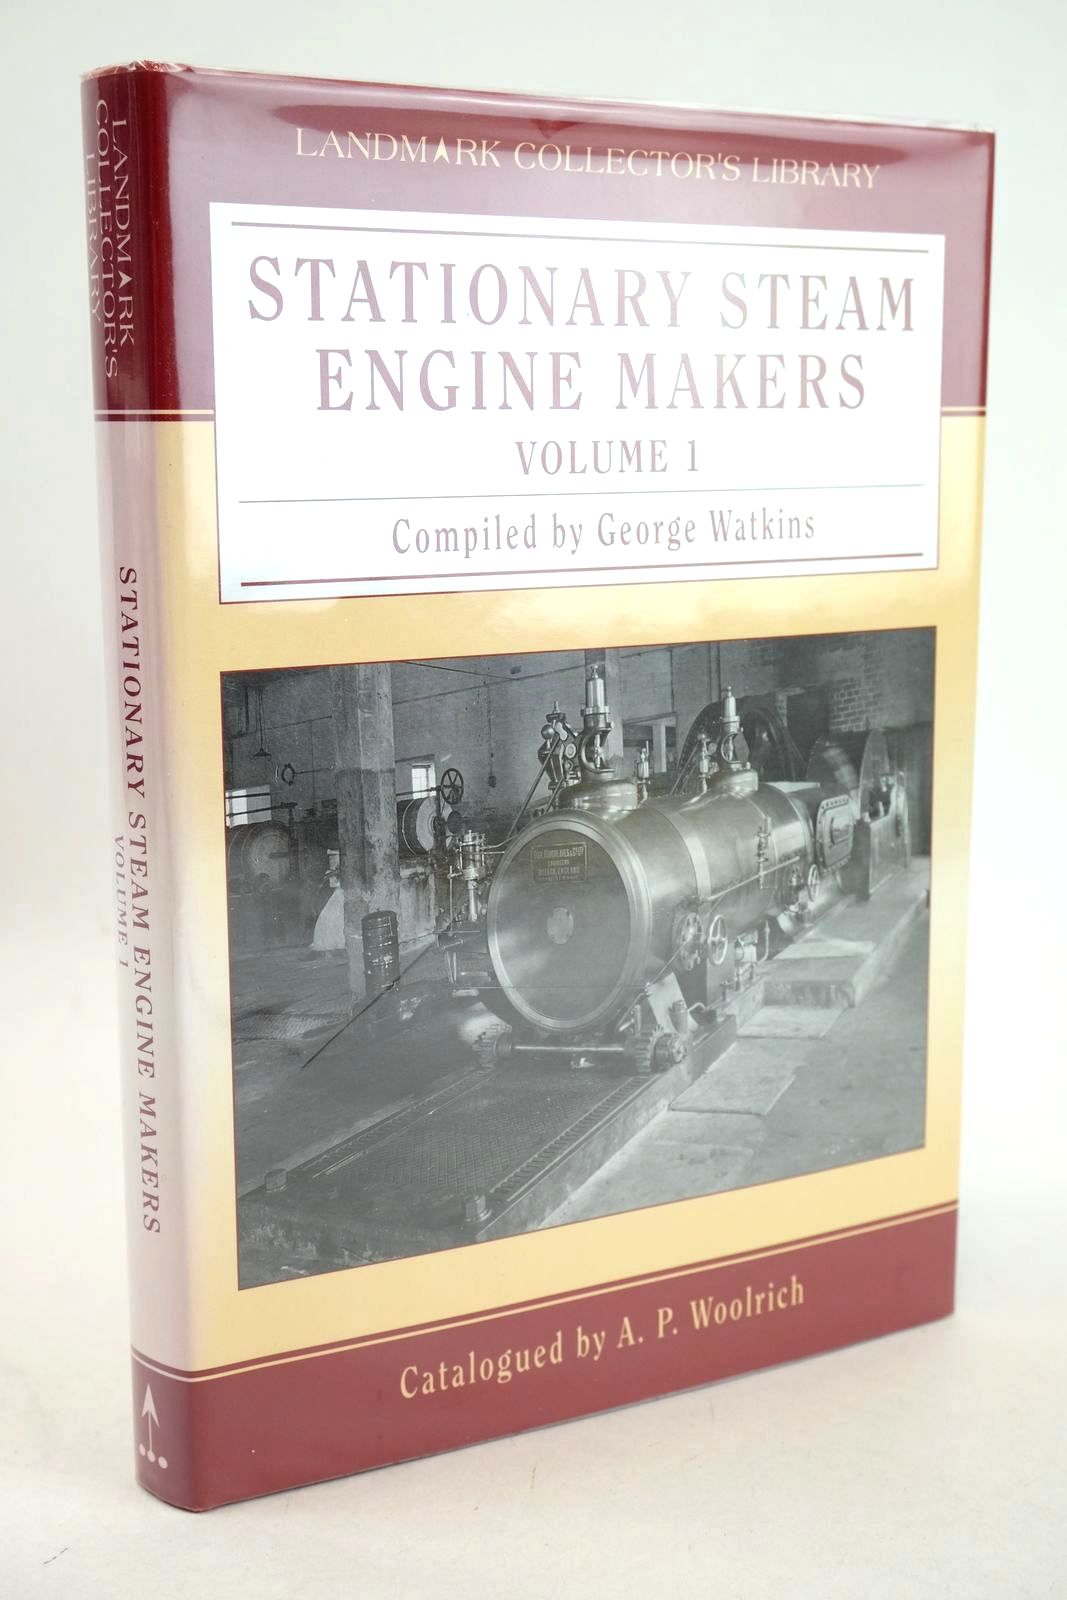 Photo of STATIONARY STEAM ENGINE MAKERS VOLUME 1 (LANDMARK COLLECTOR'S LIBRARY) written by Watkins, George Woolrich, A.P. published by Landmark Publishing (STOCK CODE: 1326690)  for sale by Stella & Rose's Books